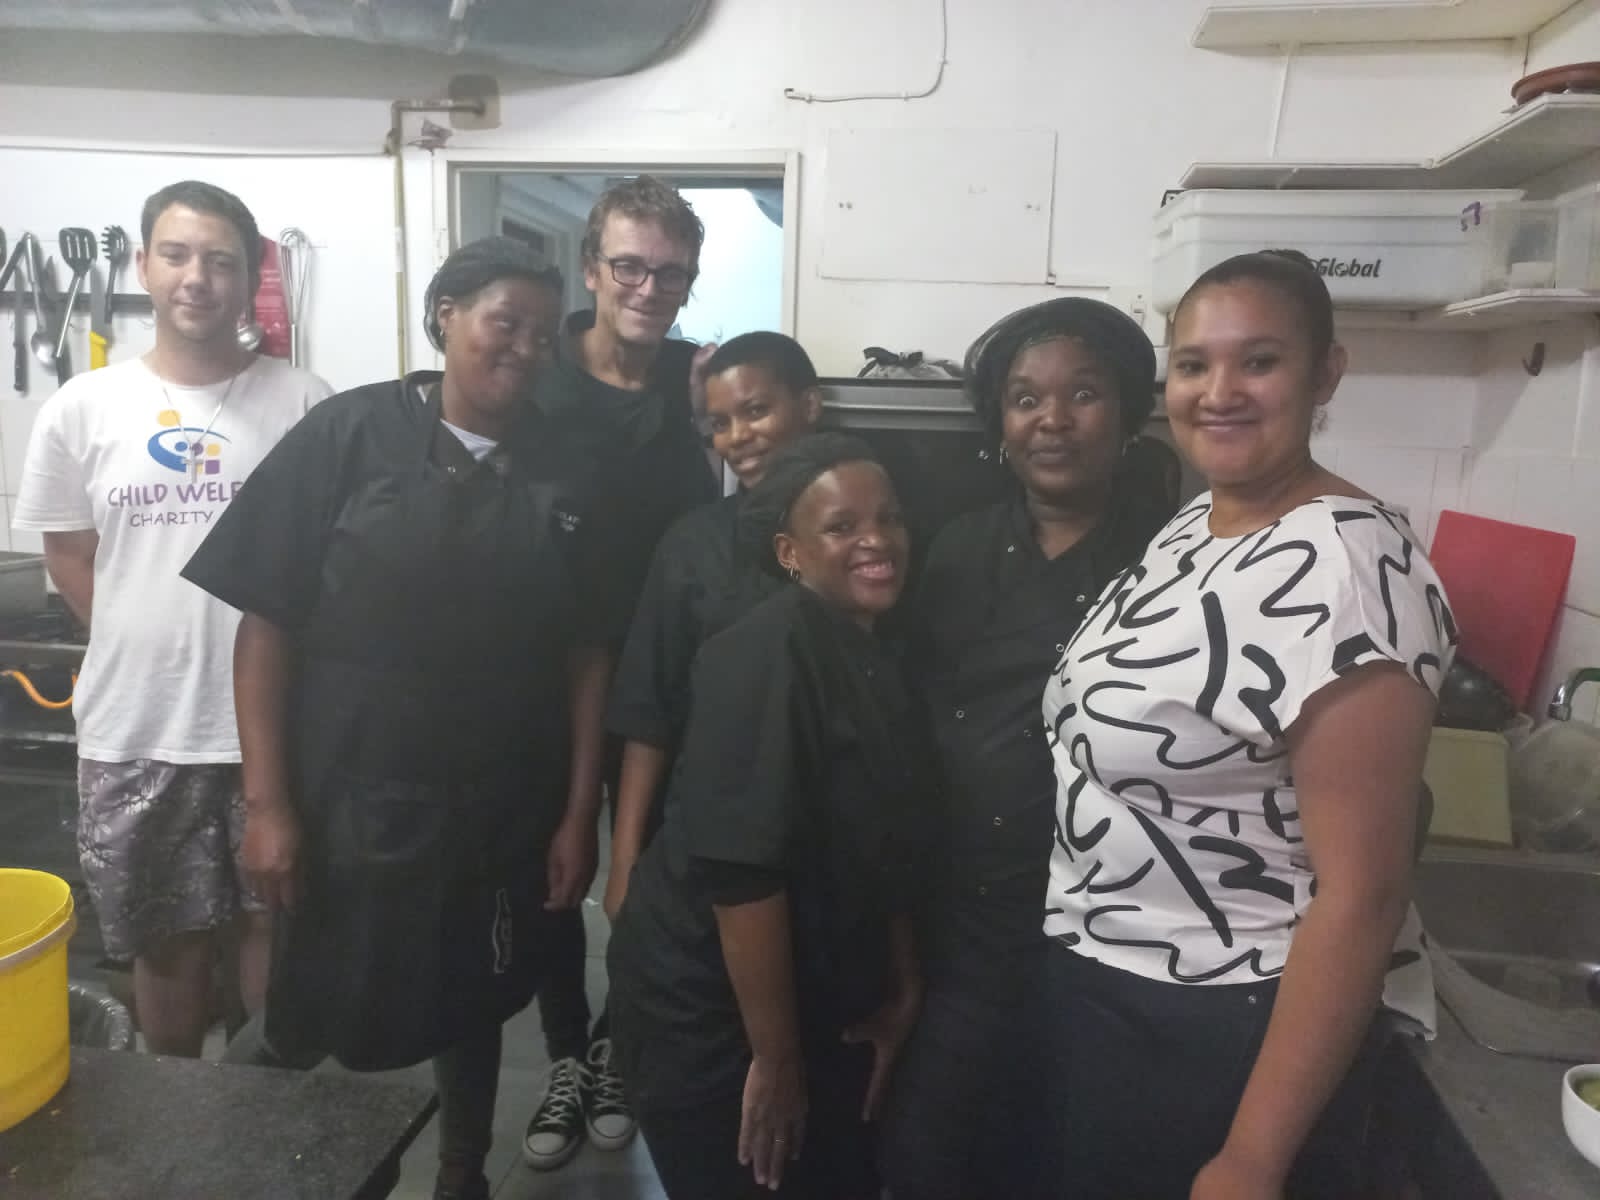 Child Welfare and Revelation Cafe´staff during Burger Evening. Photo: supplied